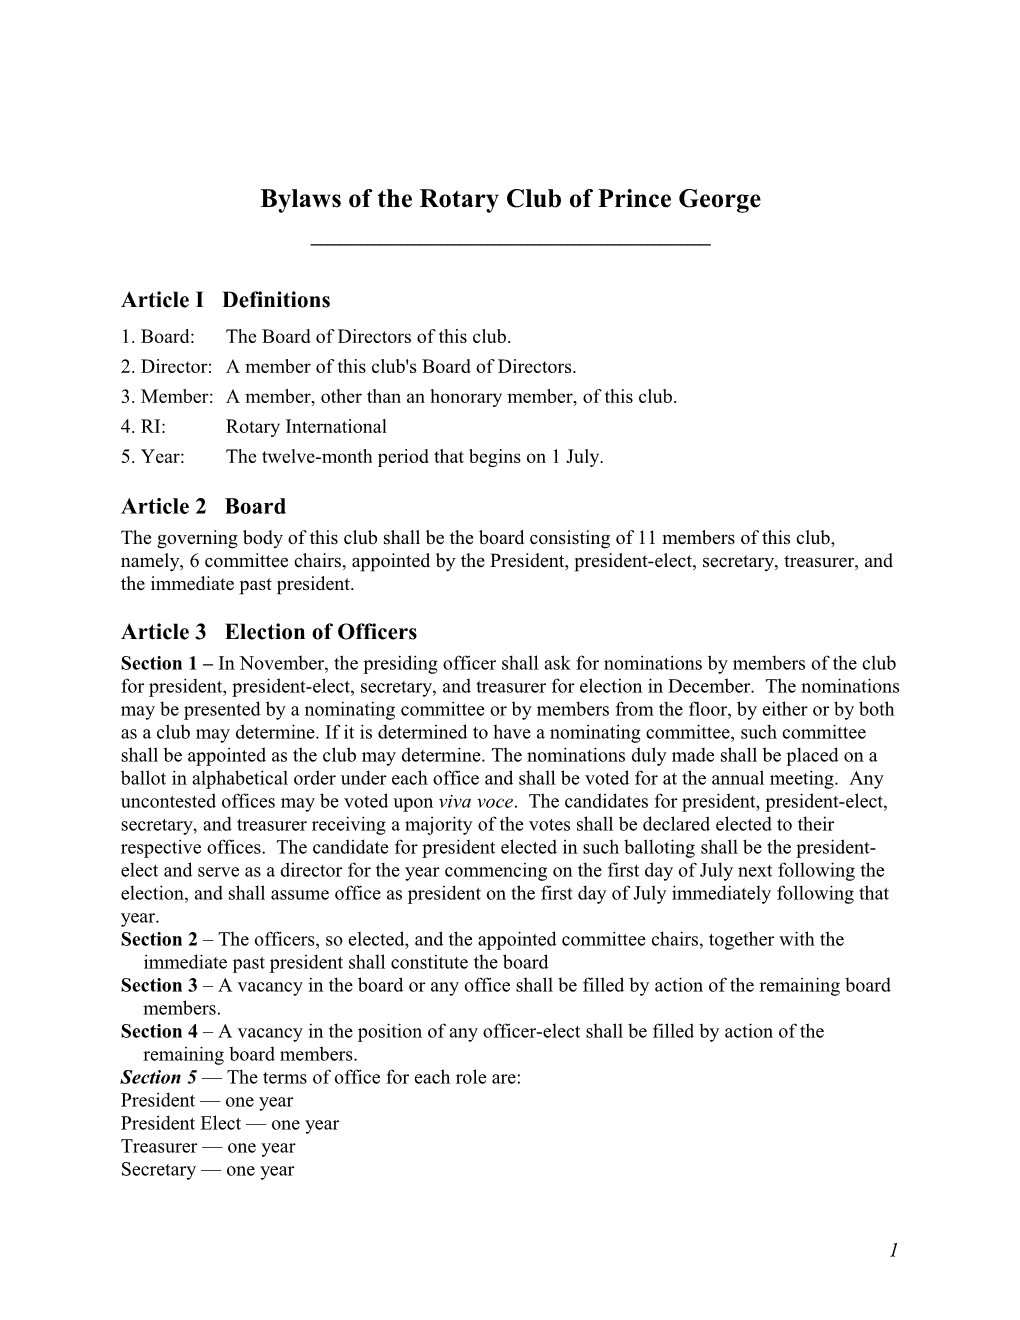 Bylaws of the Rotary Club of Prince George